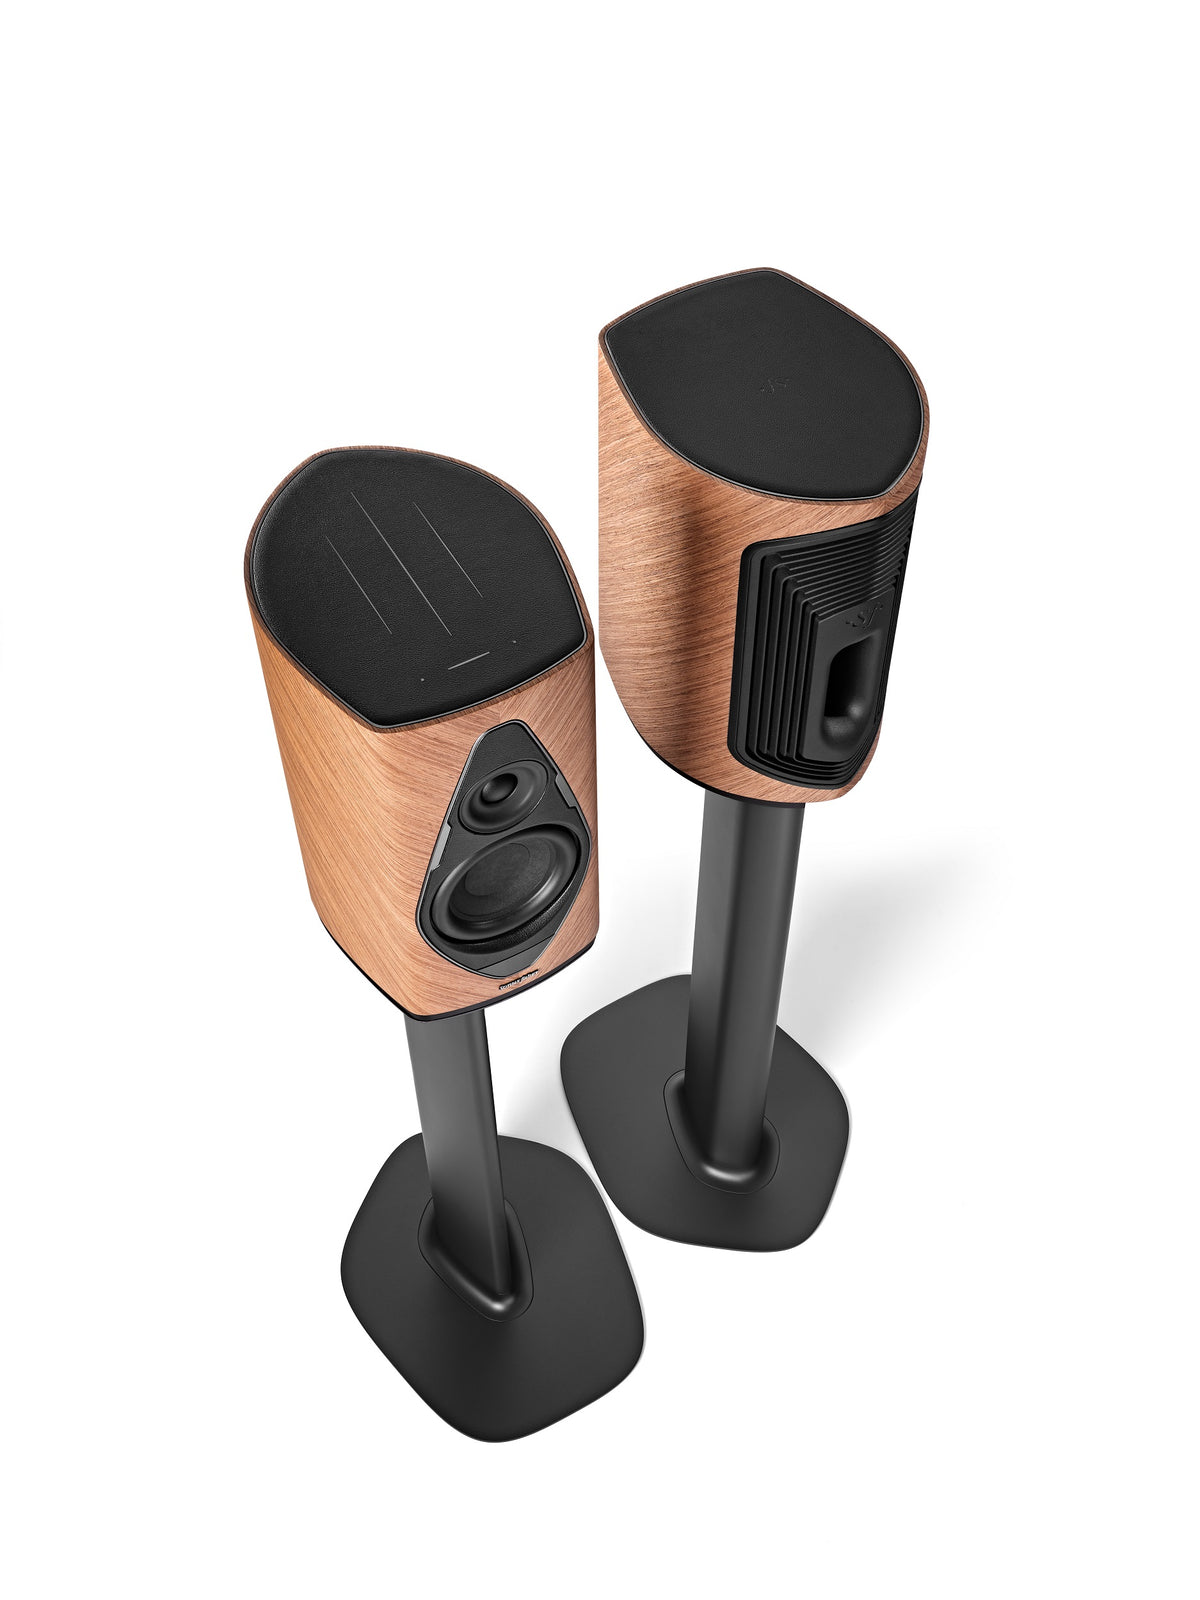 Sonus faber - Stand for Duetto